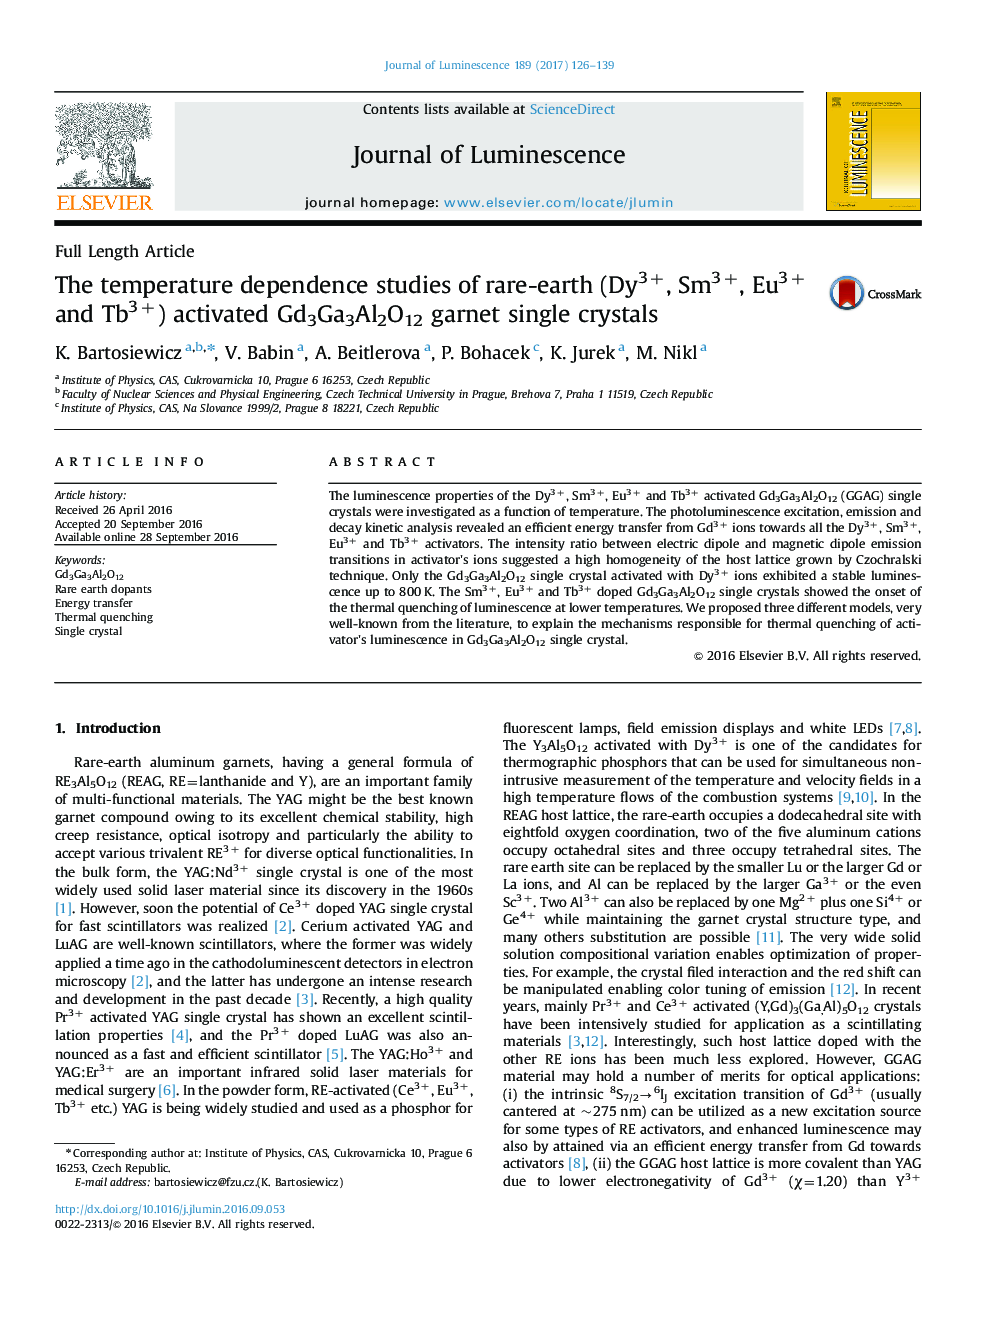 Full Length ArticleThe temperature dependence studies of rare-earth (Dy3+, Sm3+, Eu3+ and Tb3+) activated Gd3Ga3Al2O12 garnet single crystals